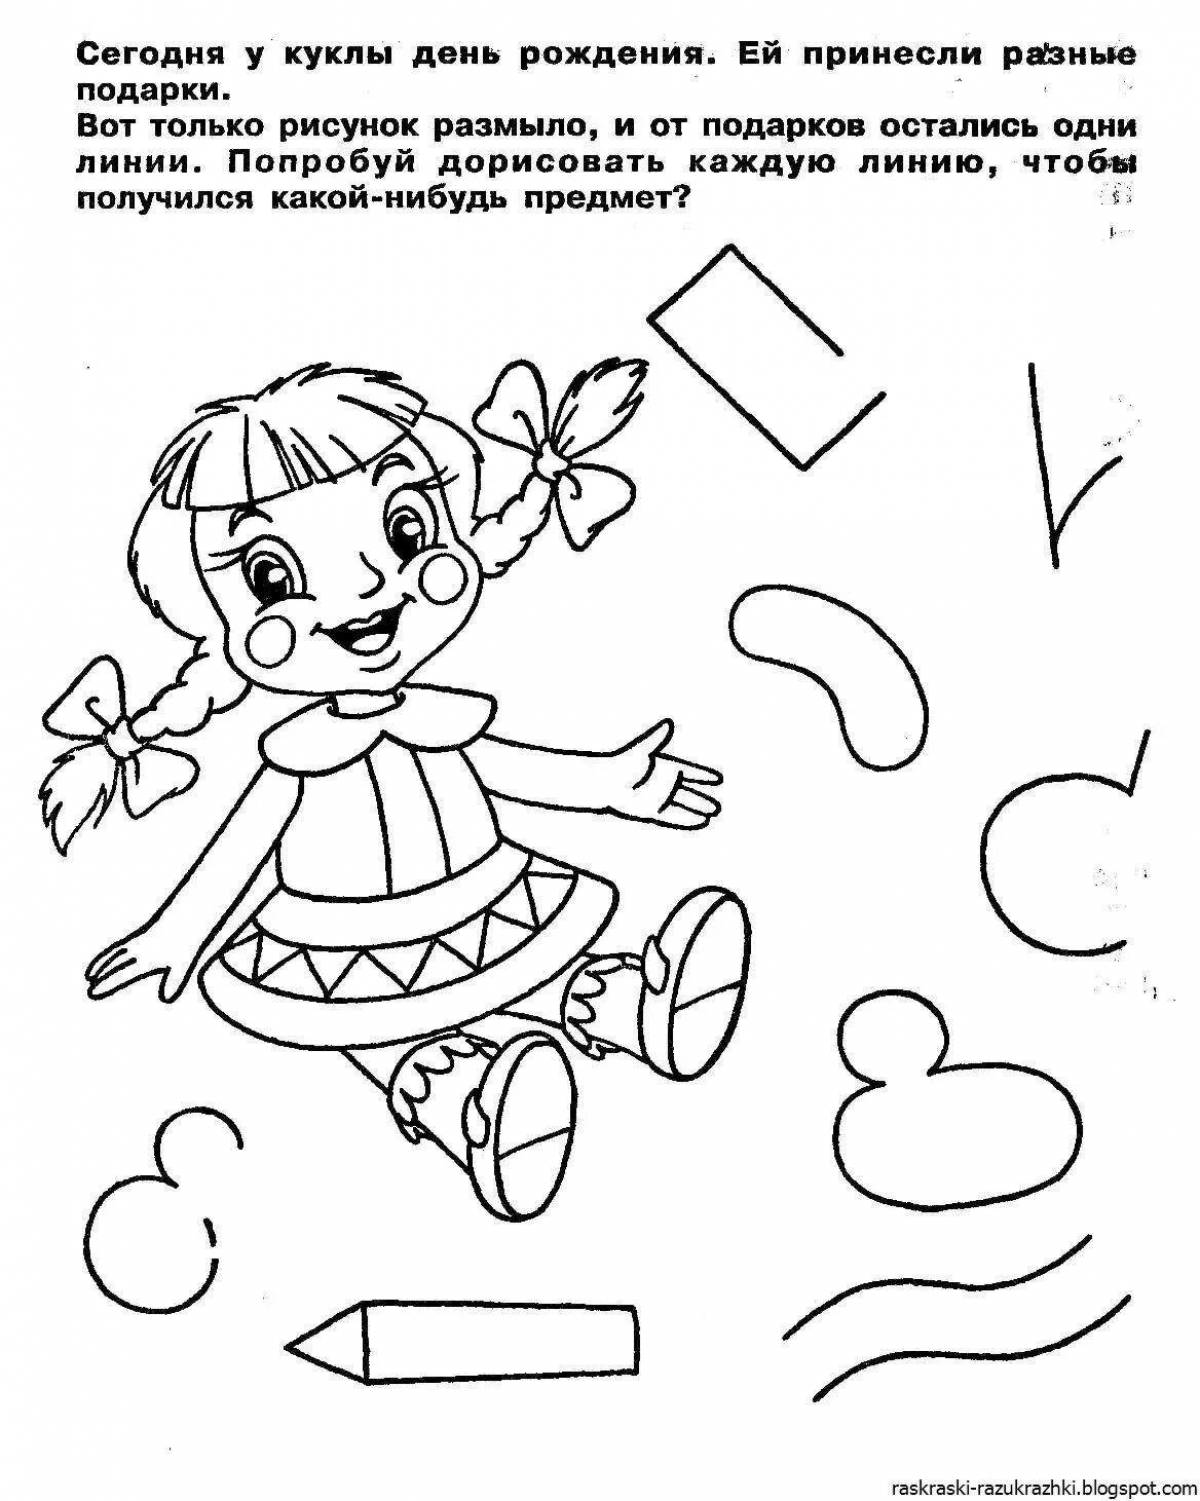 Creative coloring book for children of cognitive age 4-5 years old